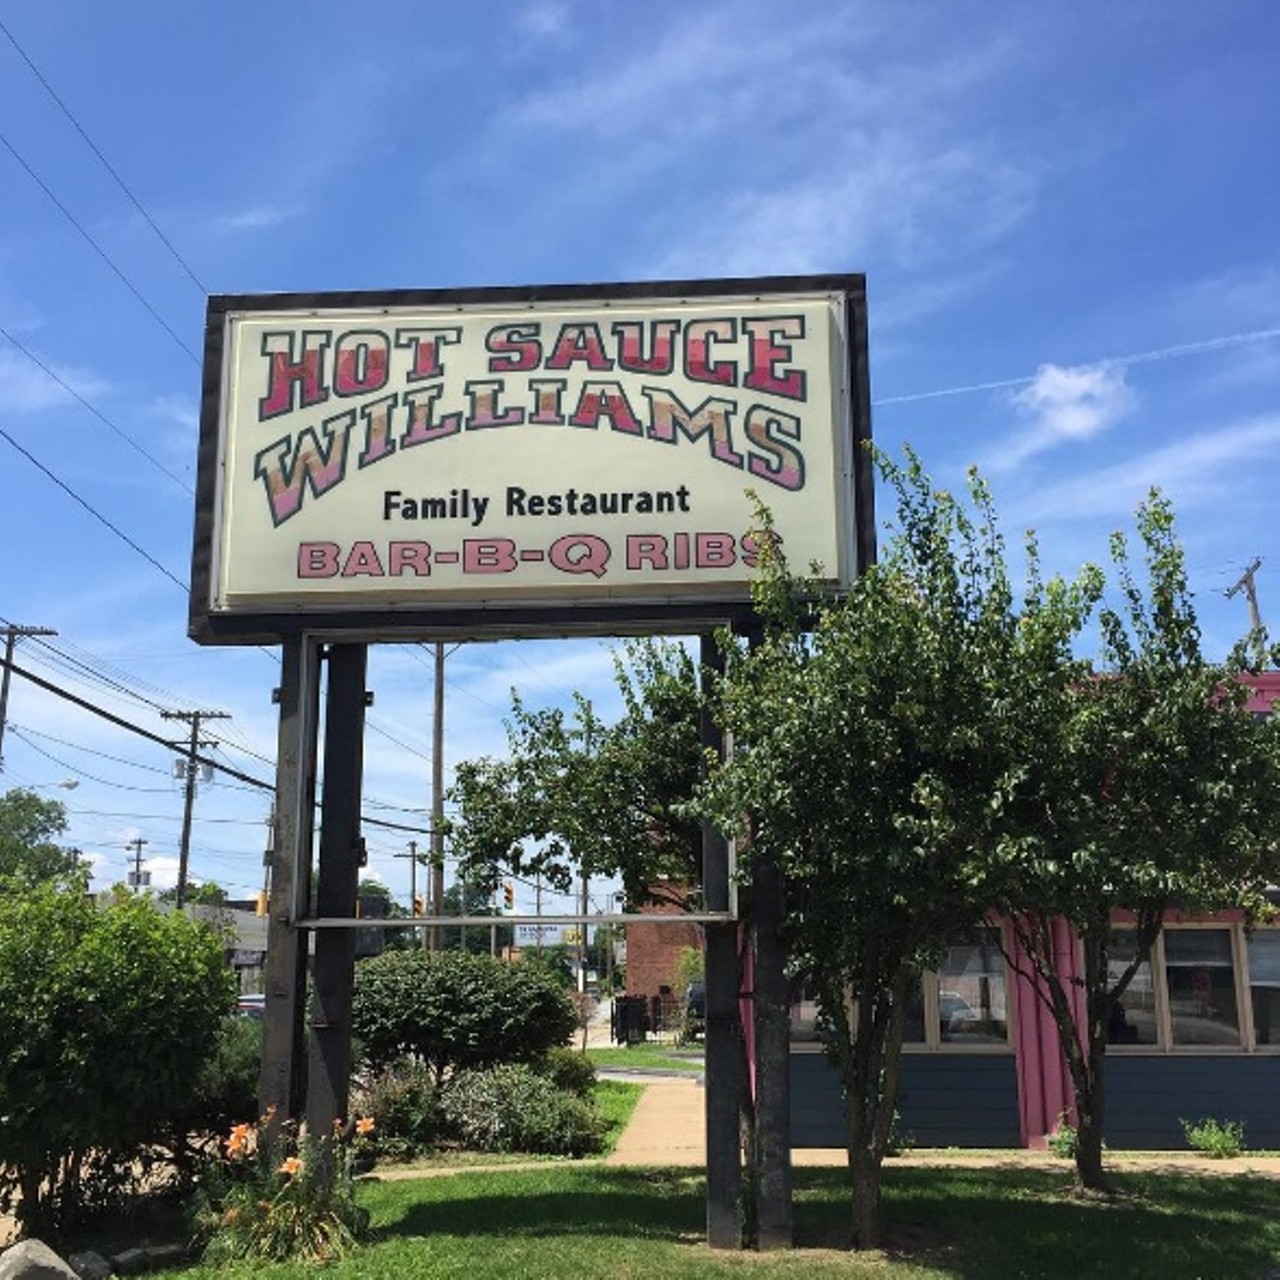 Hot Sauce Williams
7815 Carnegie Ave.
A major era in Cleveland food will come to an end on March 31 when the Carnegie location of Hot Sauce Williams closed its doors for good. While there are two other locations left to get your Polish Boy fix, the Carnegie mainstay is sorely missed. 
Scene Archives photo via keitherambrose/Instagram